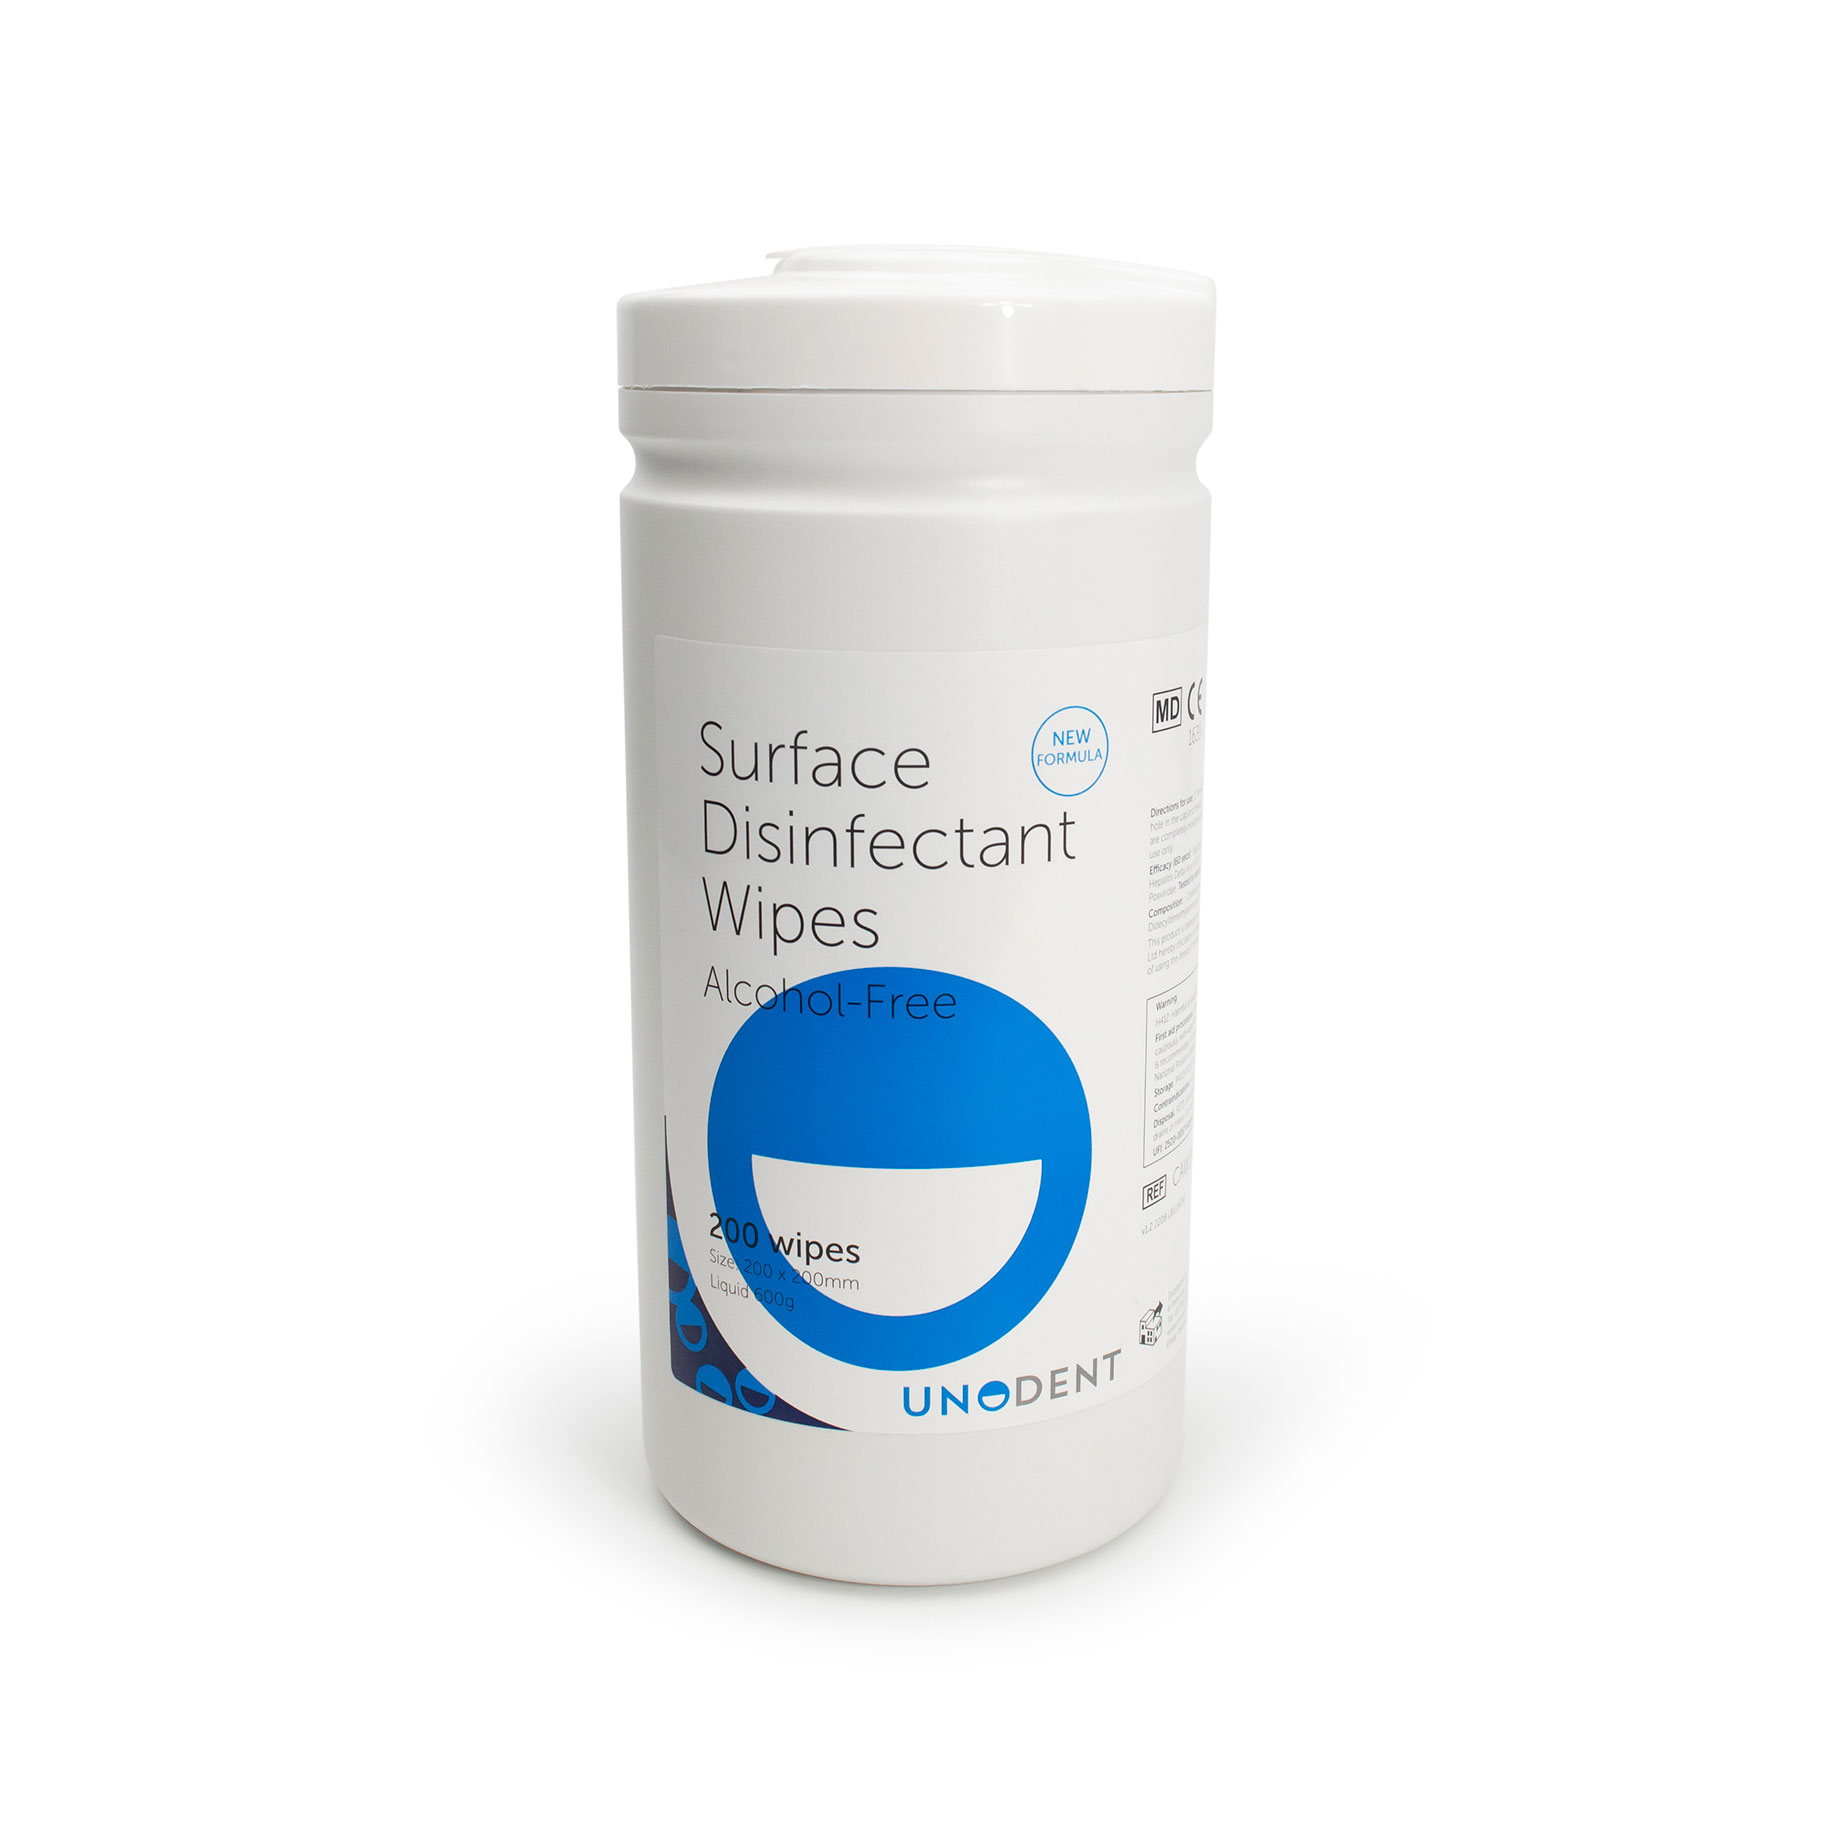 NEW Formulation Surface Disinfectant Wipes - Alcohol-free Apple 